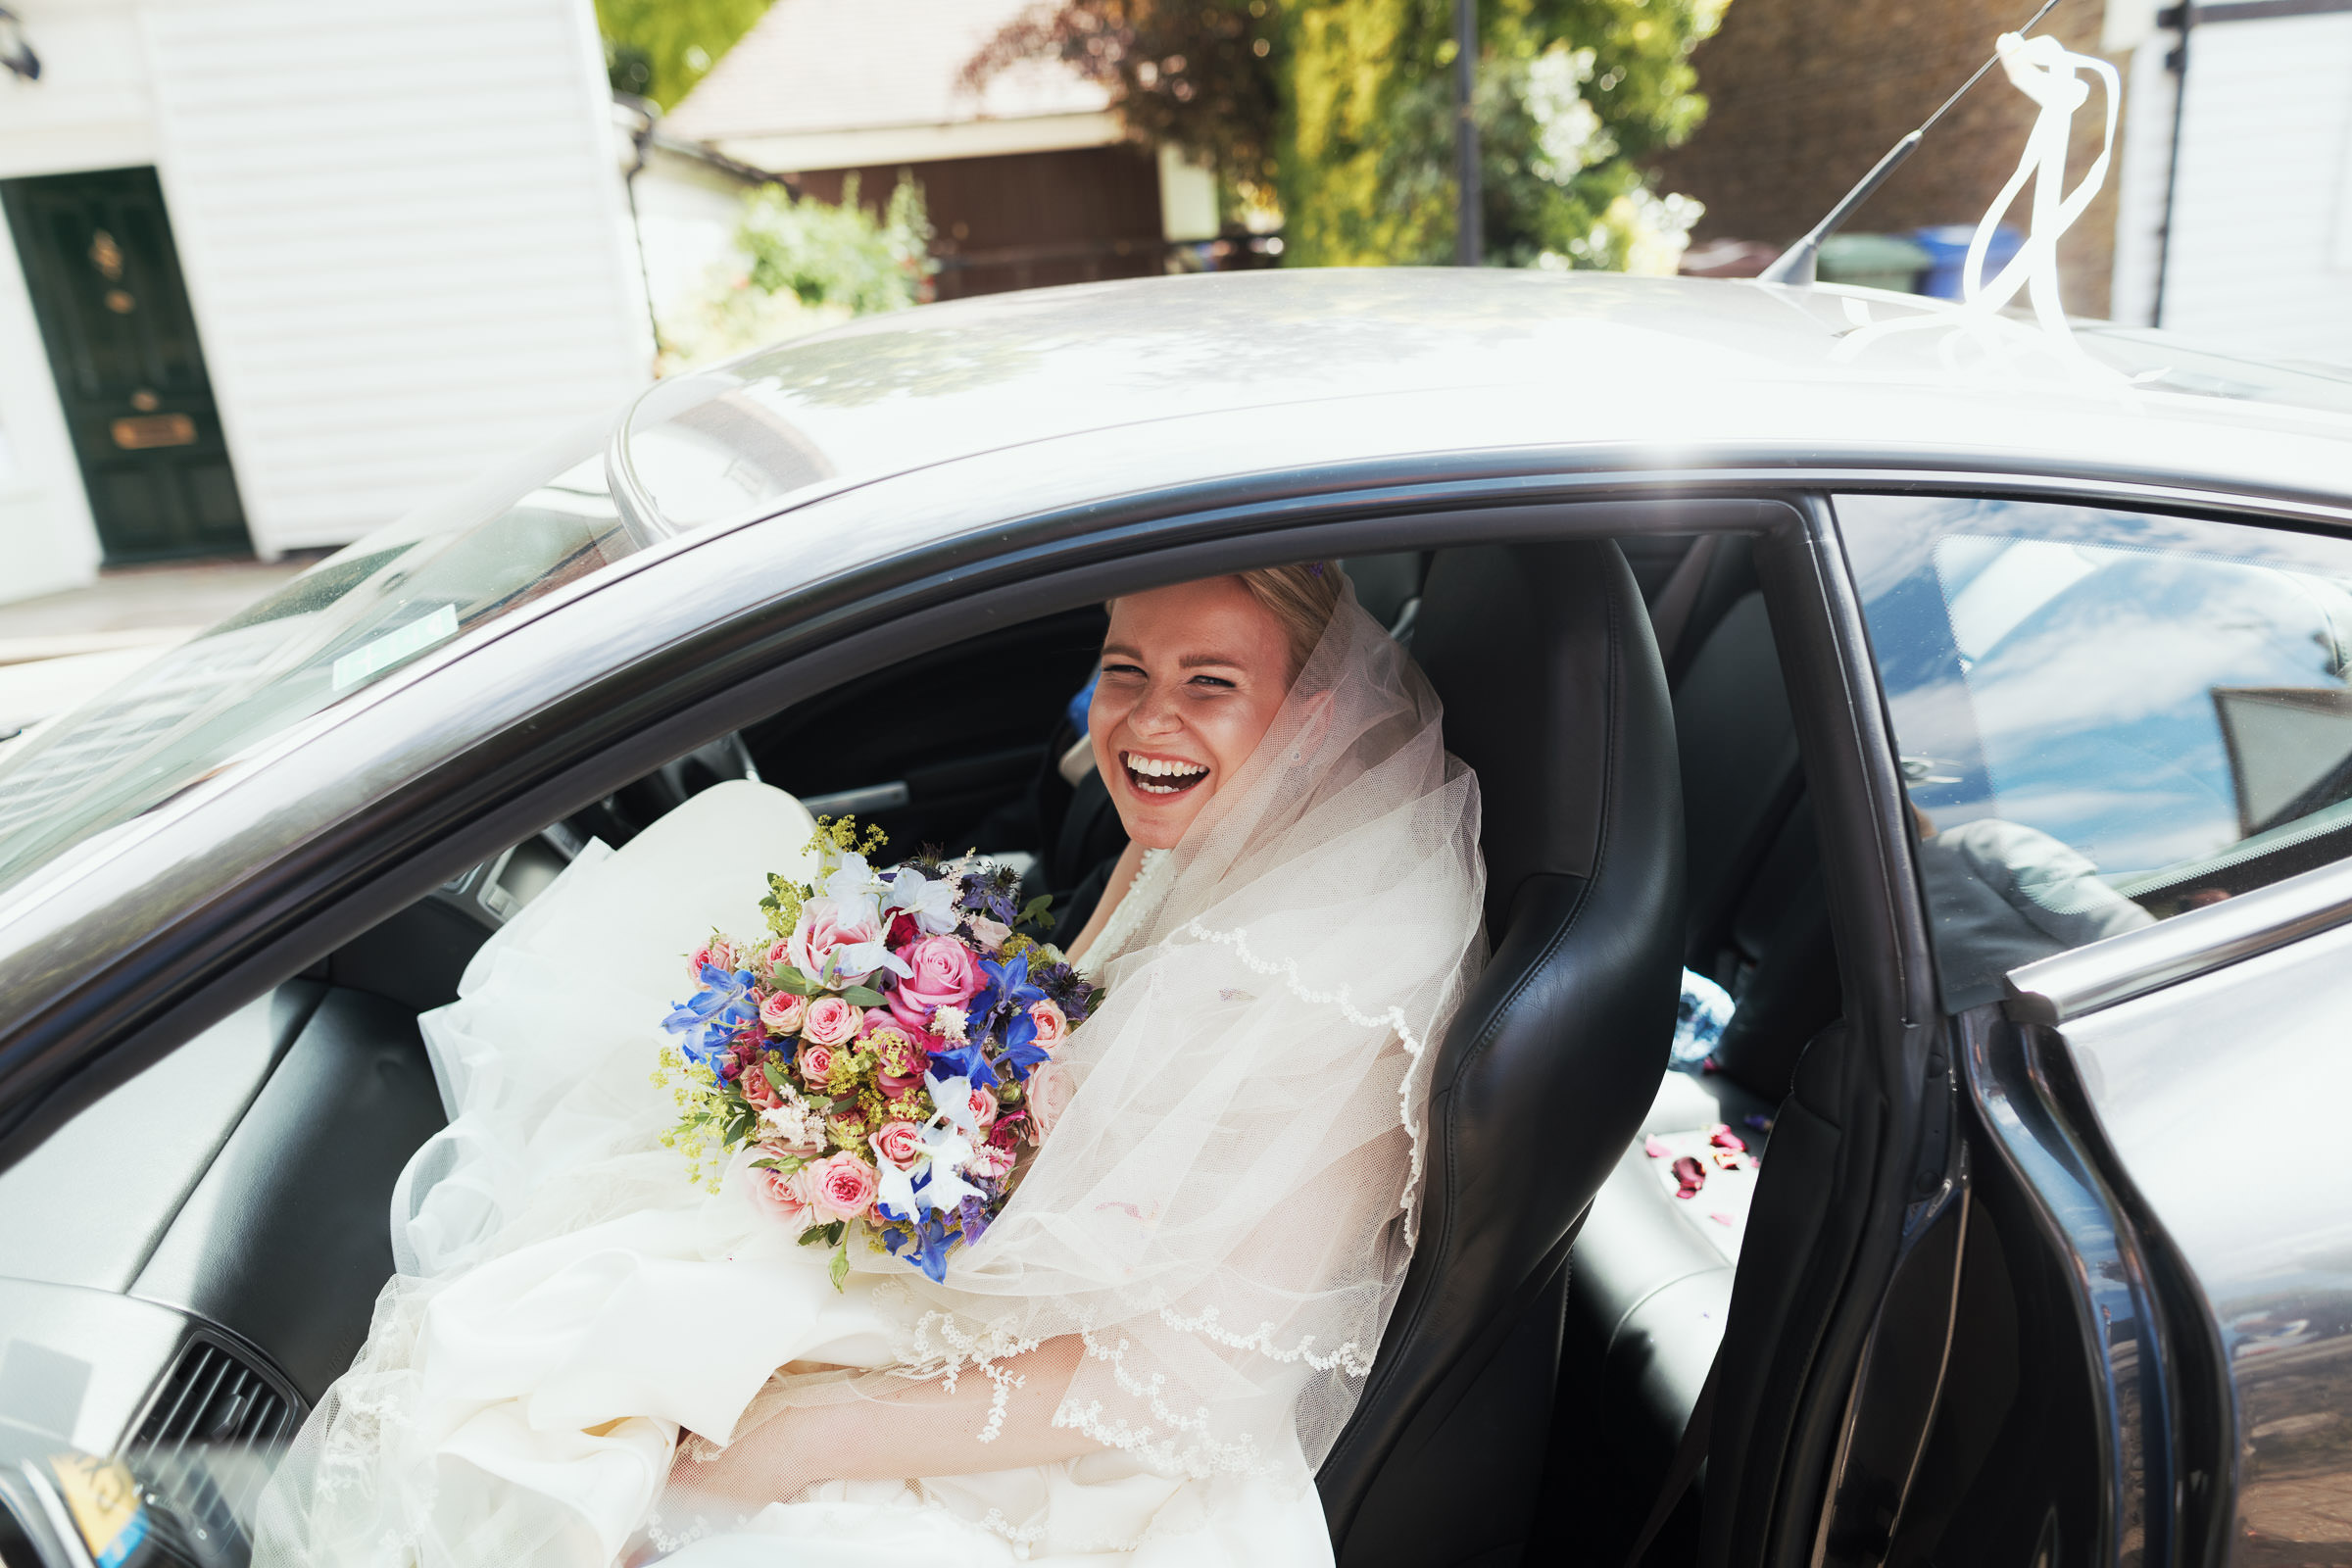 Bride getting in the car smiling after her wedding at St Giles & All Saints Church, Orsett. Holding a bouquet, wearing the Morilee Laurie ML5684 wedding dress, and a veil.